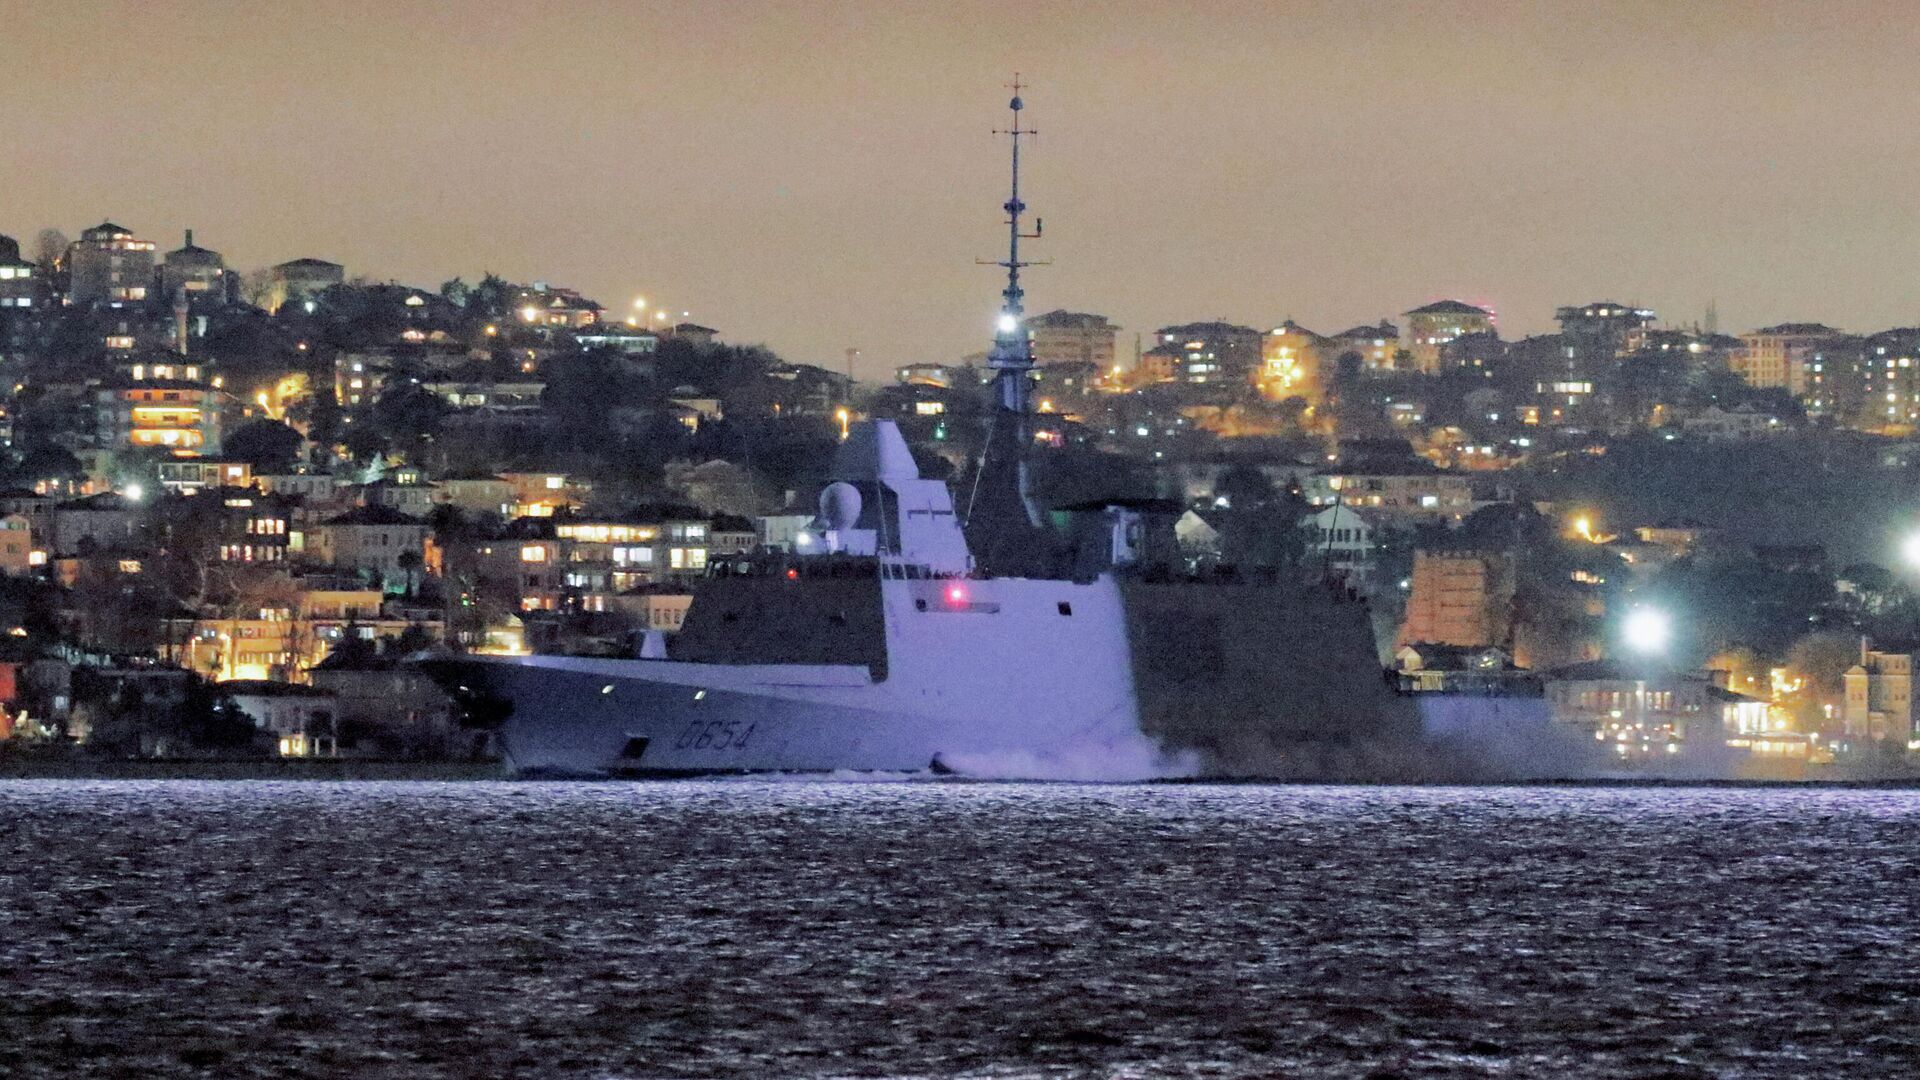 French Navy's frigate Auvergne sails in the Bosphorus as it is on its way to the Black Sea in Istanbul, Turkey, December 13, 2021 - Sputnik International, 1920, 22.12.2021